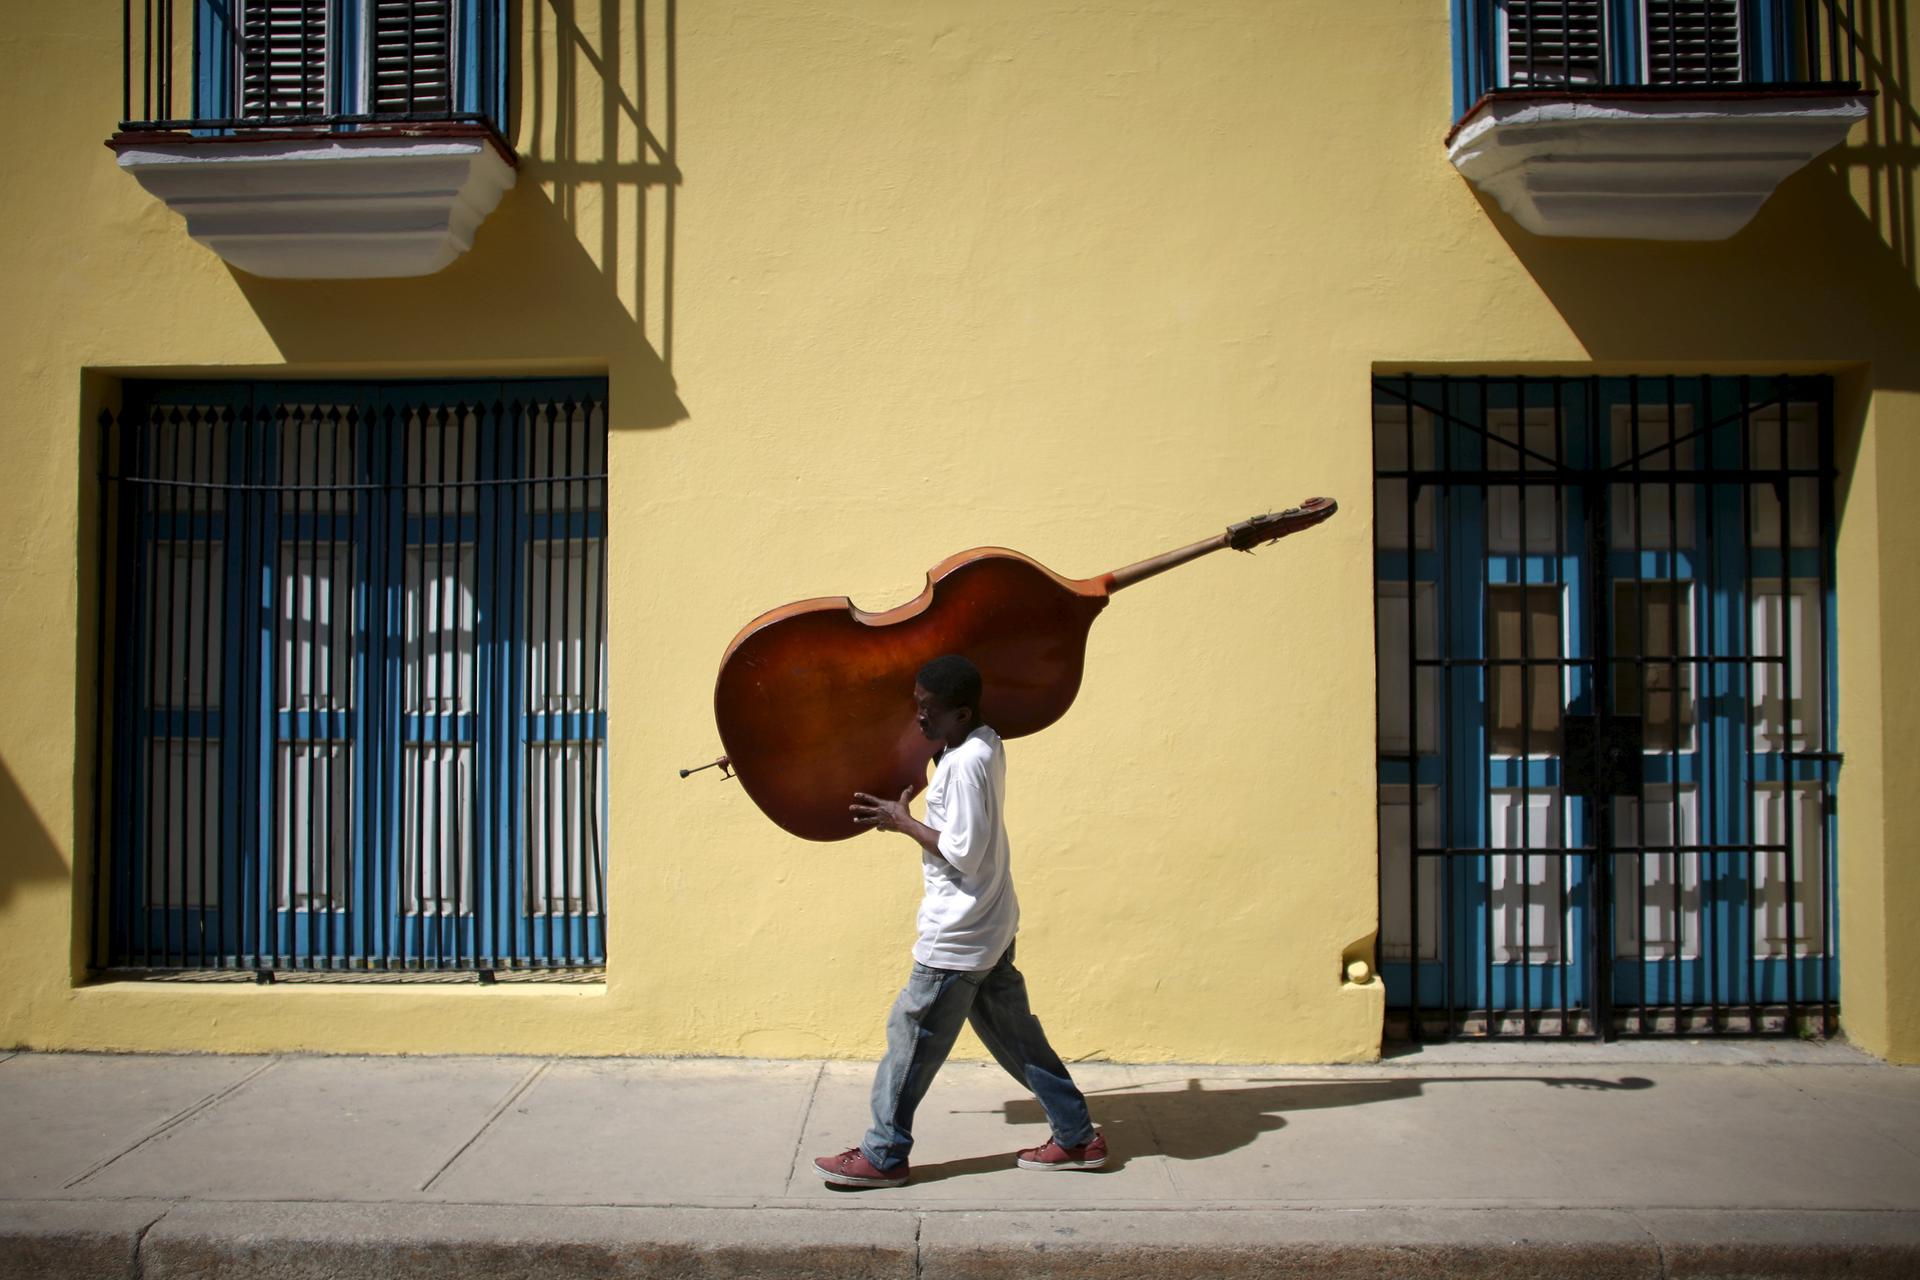 Musician Frilal Ortiz carries a double bass in downtown Havana